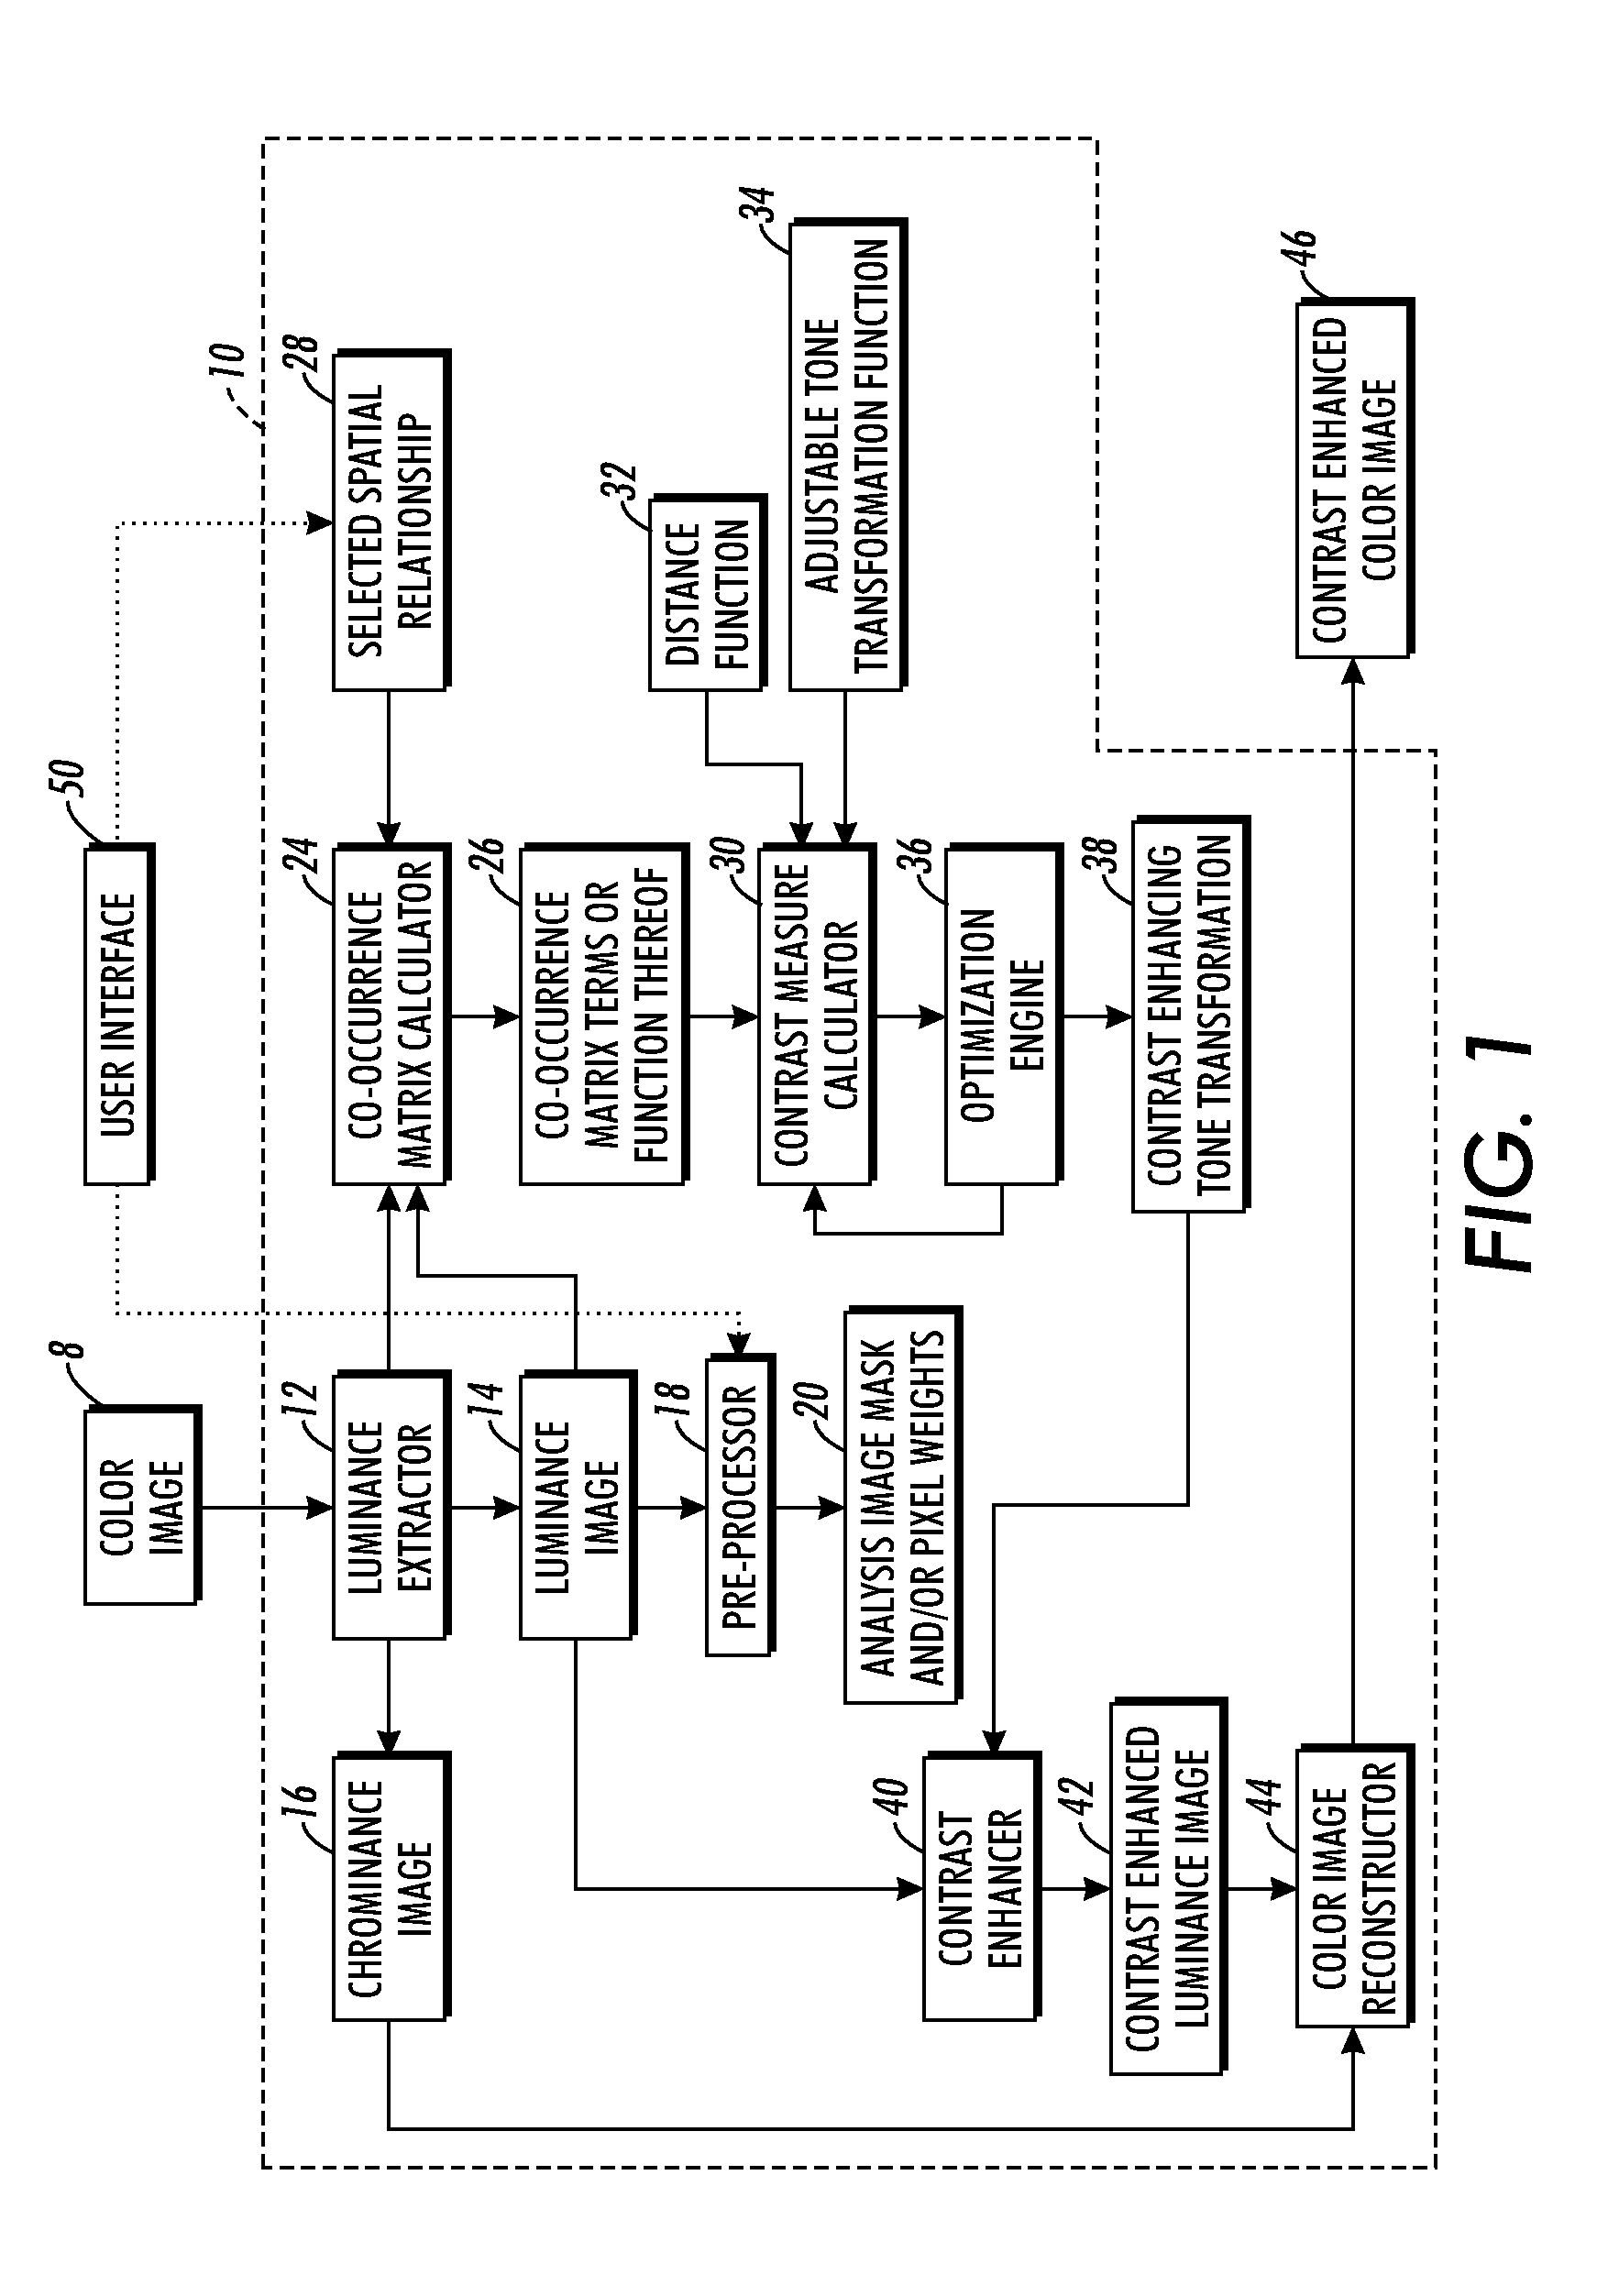 Contrast enhancement methods and apparatuses